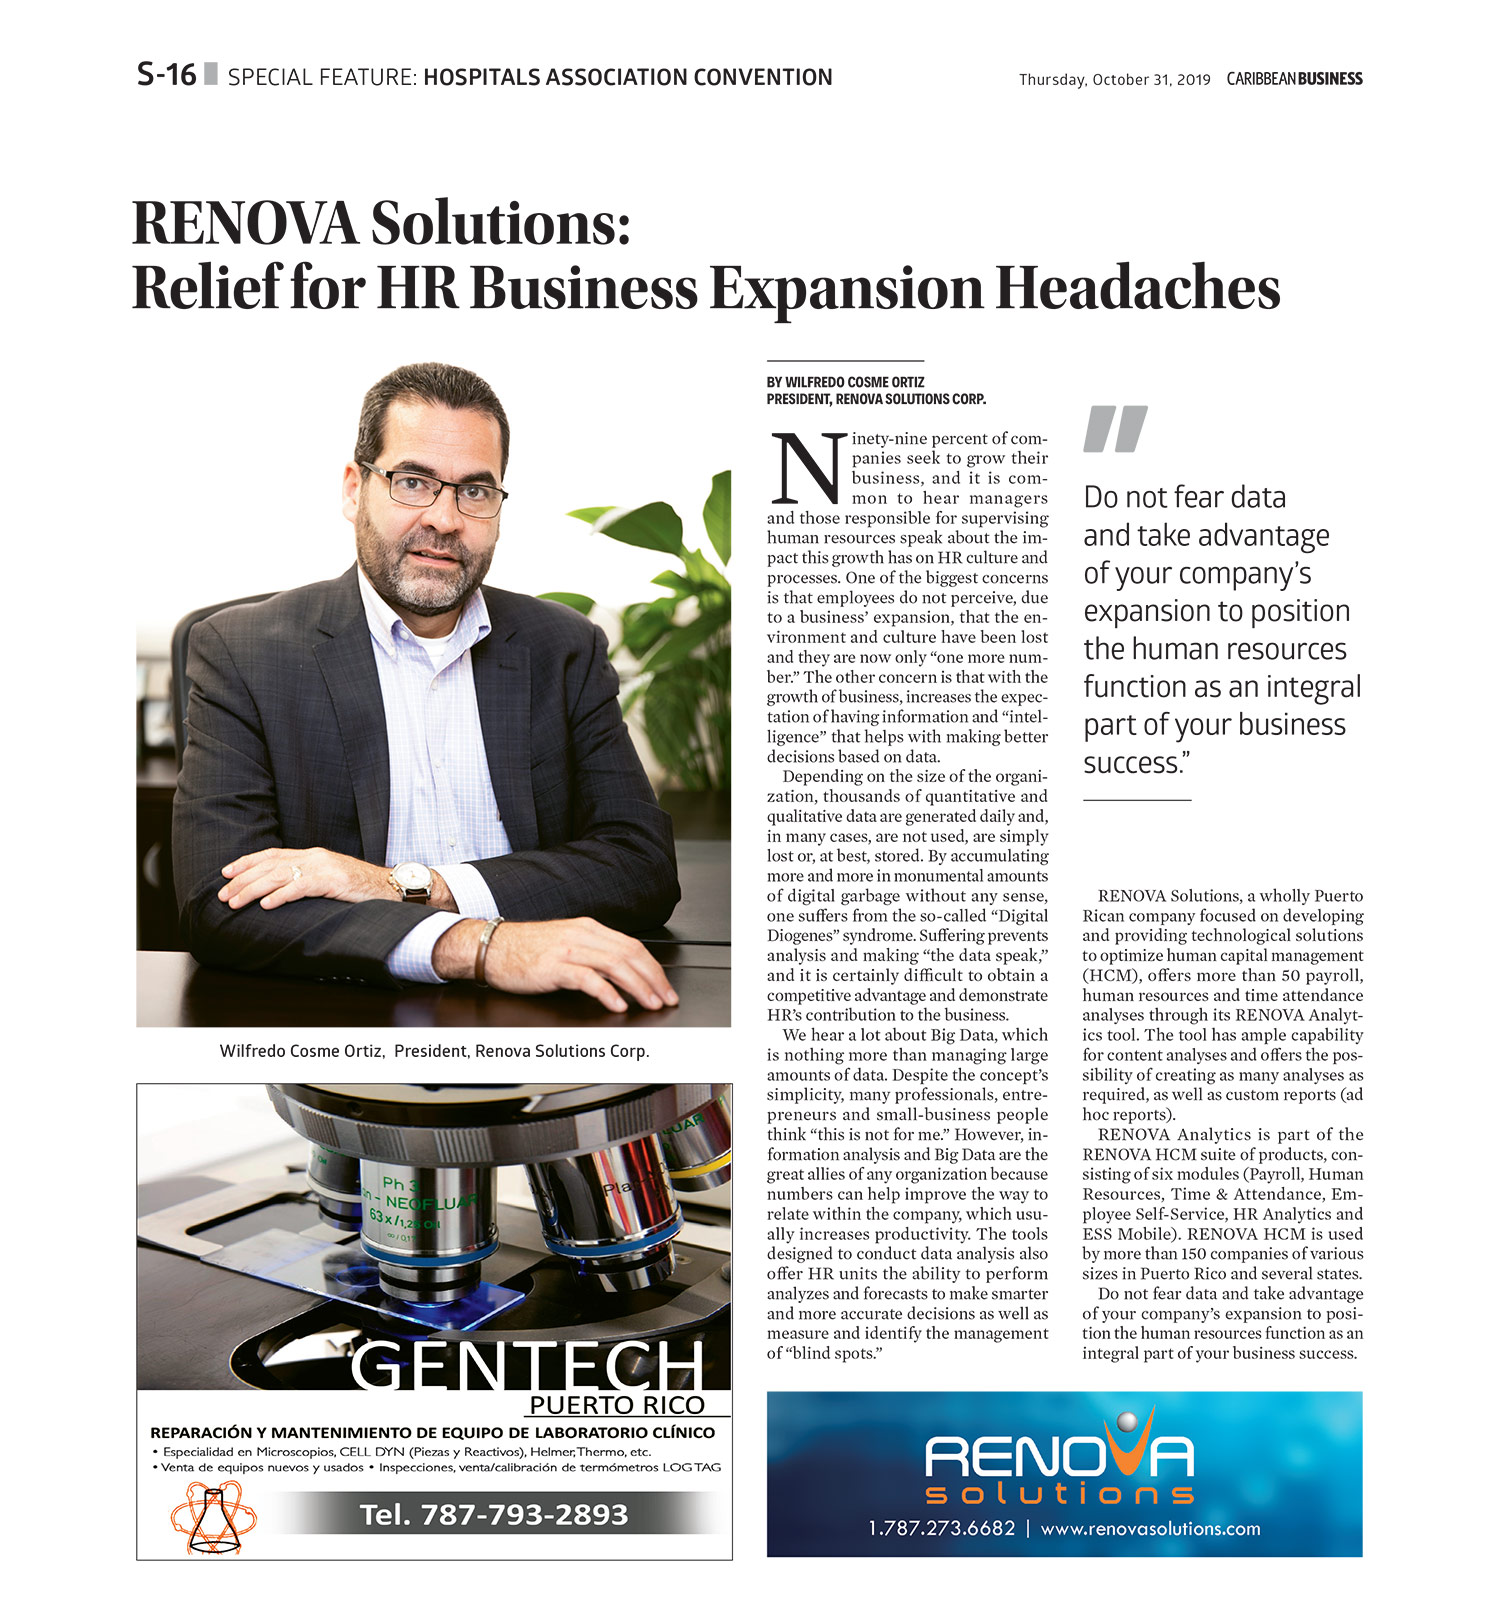 RENOVA Solutions: Relief for HR Business Expansion Headaches